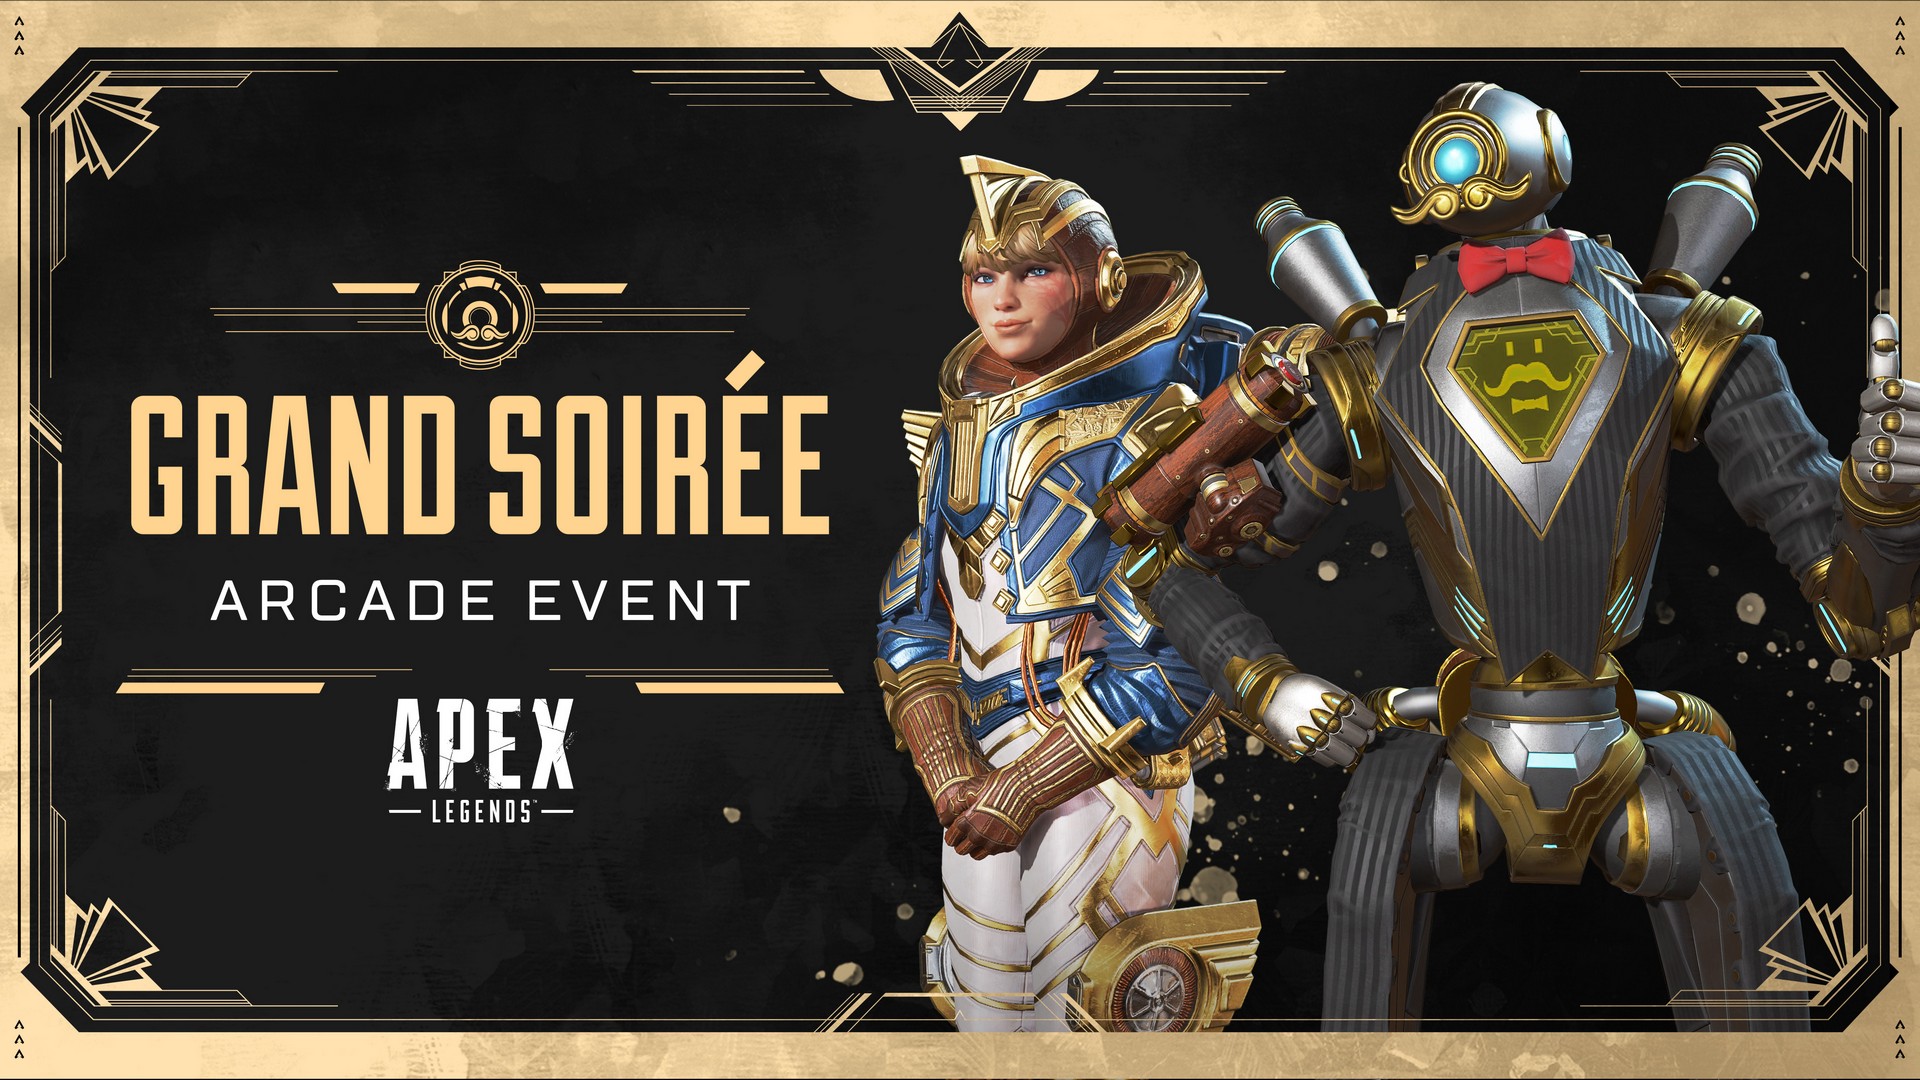 Apex Legends to Host Grand Soirée Arcade Event Ft. 7 Rotating Limited-Time Modes